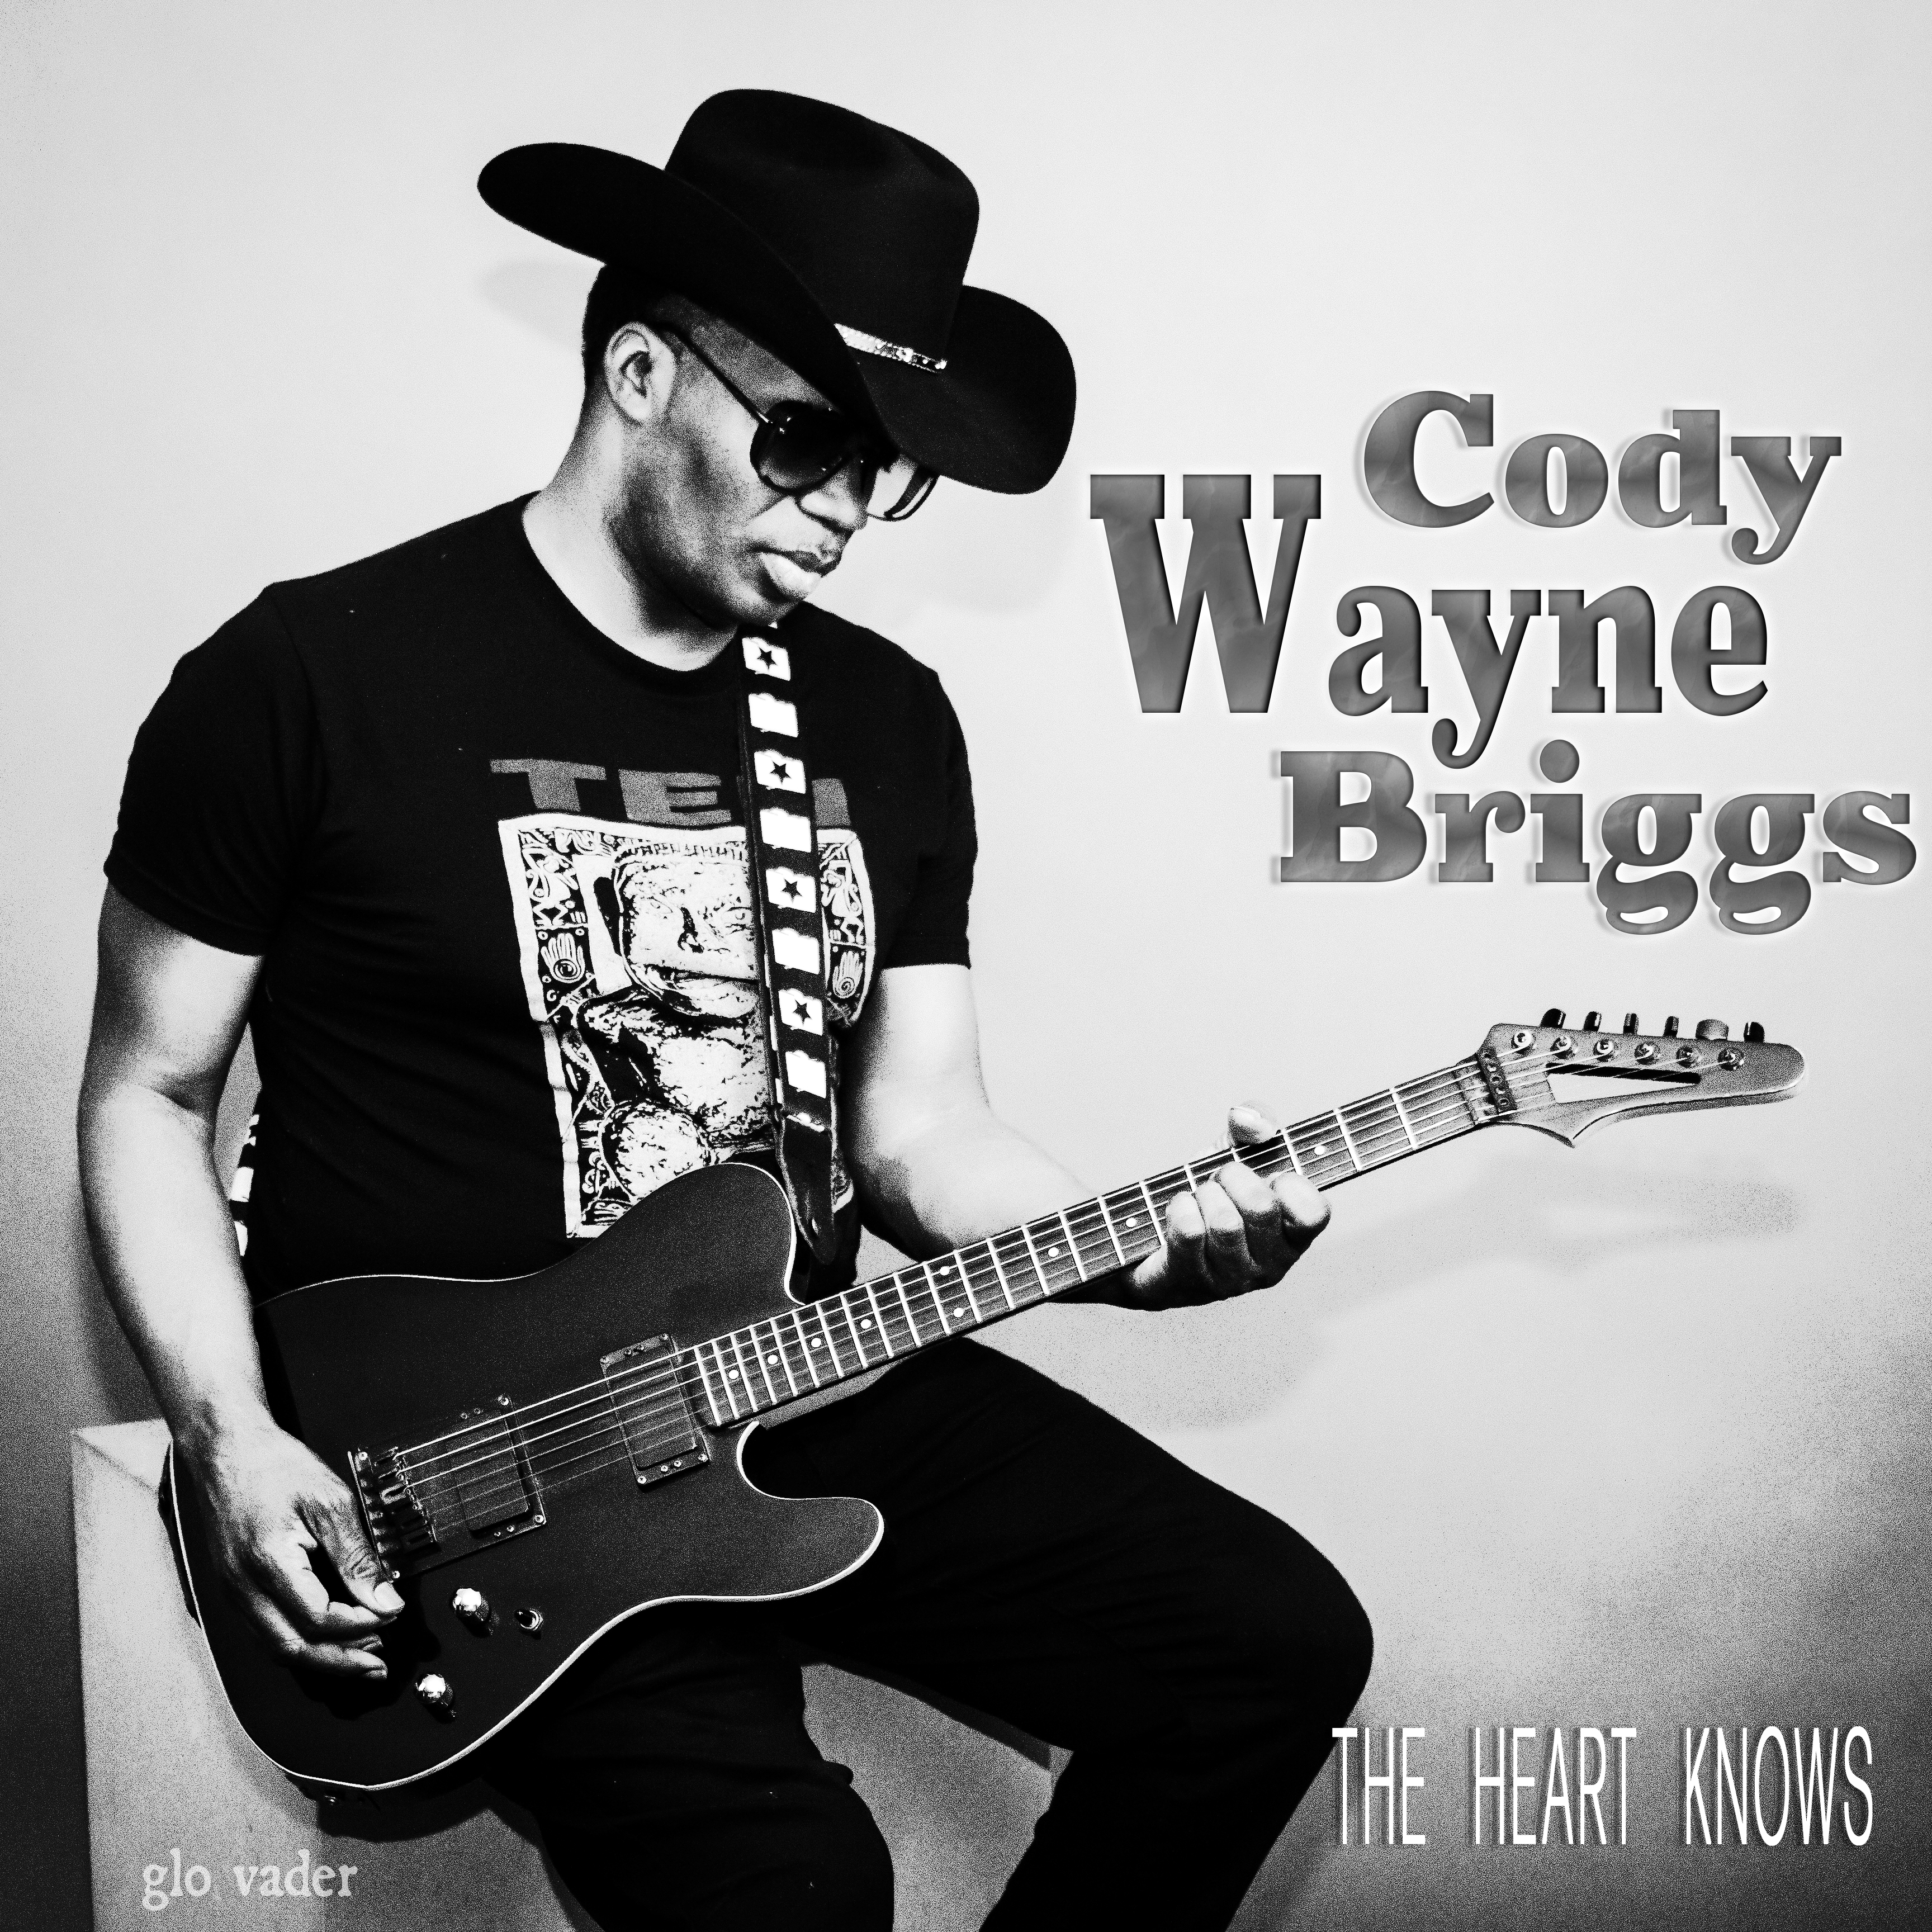 Wearing a black T-shirt and cowboy hat, Cody Lynn Briggs holds an electric guitar